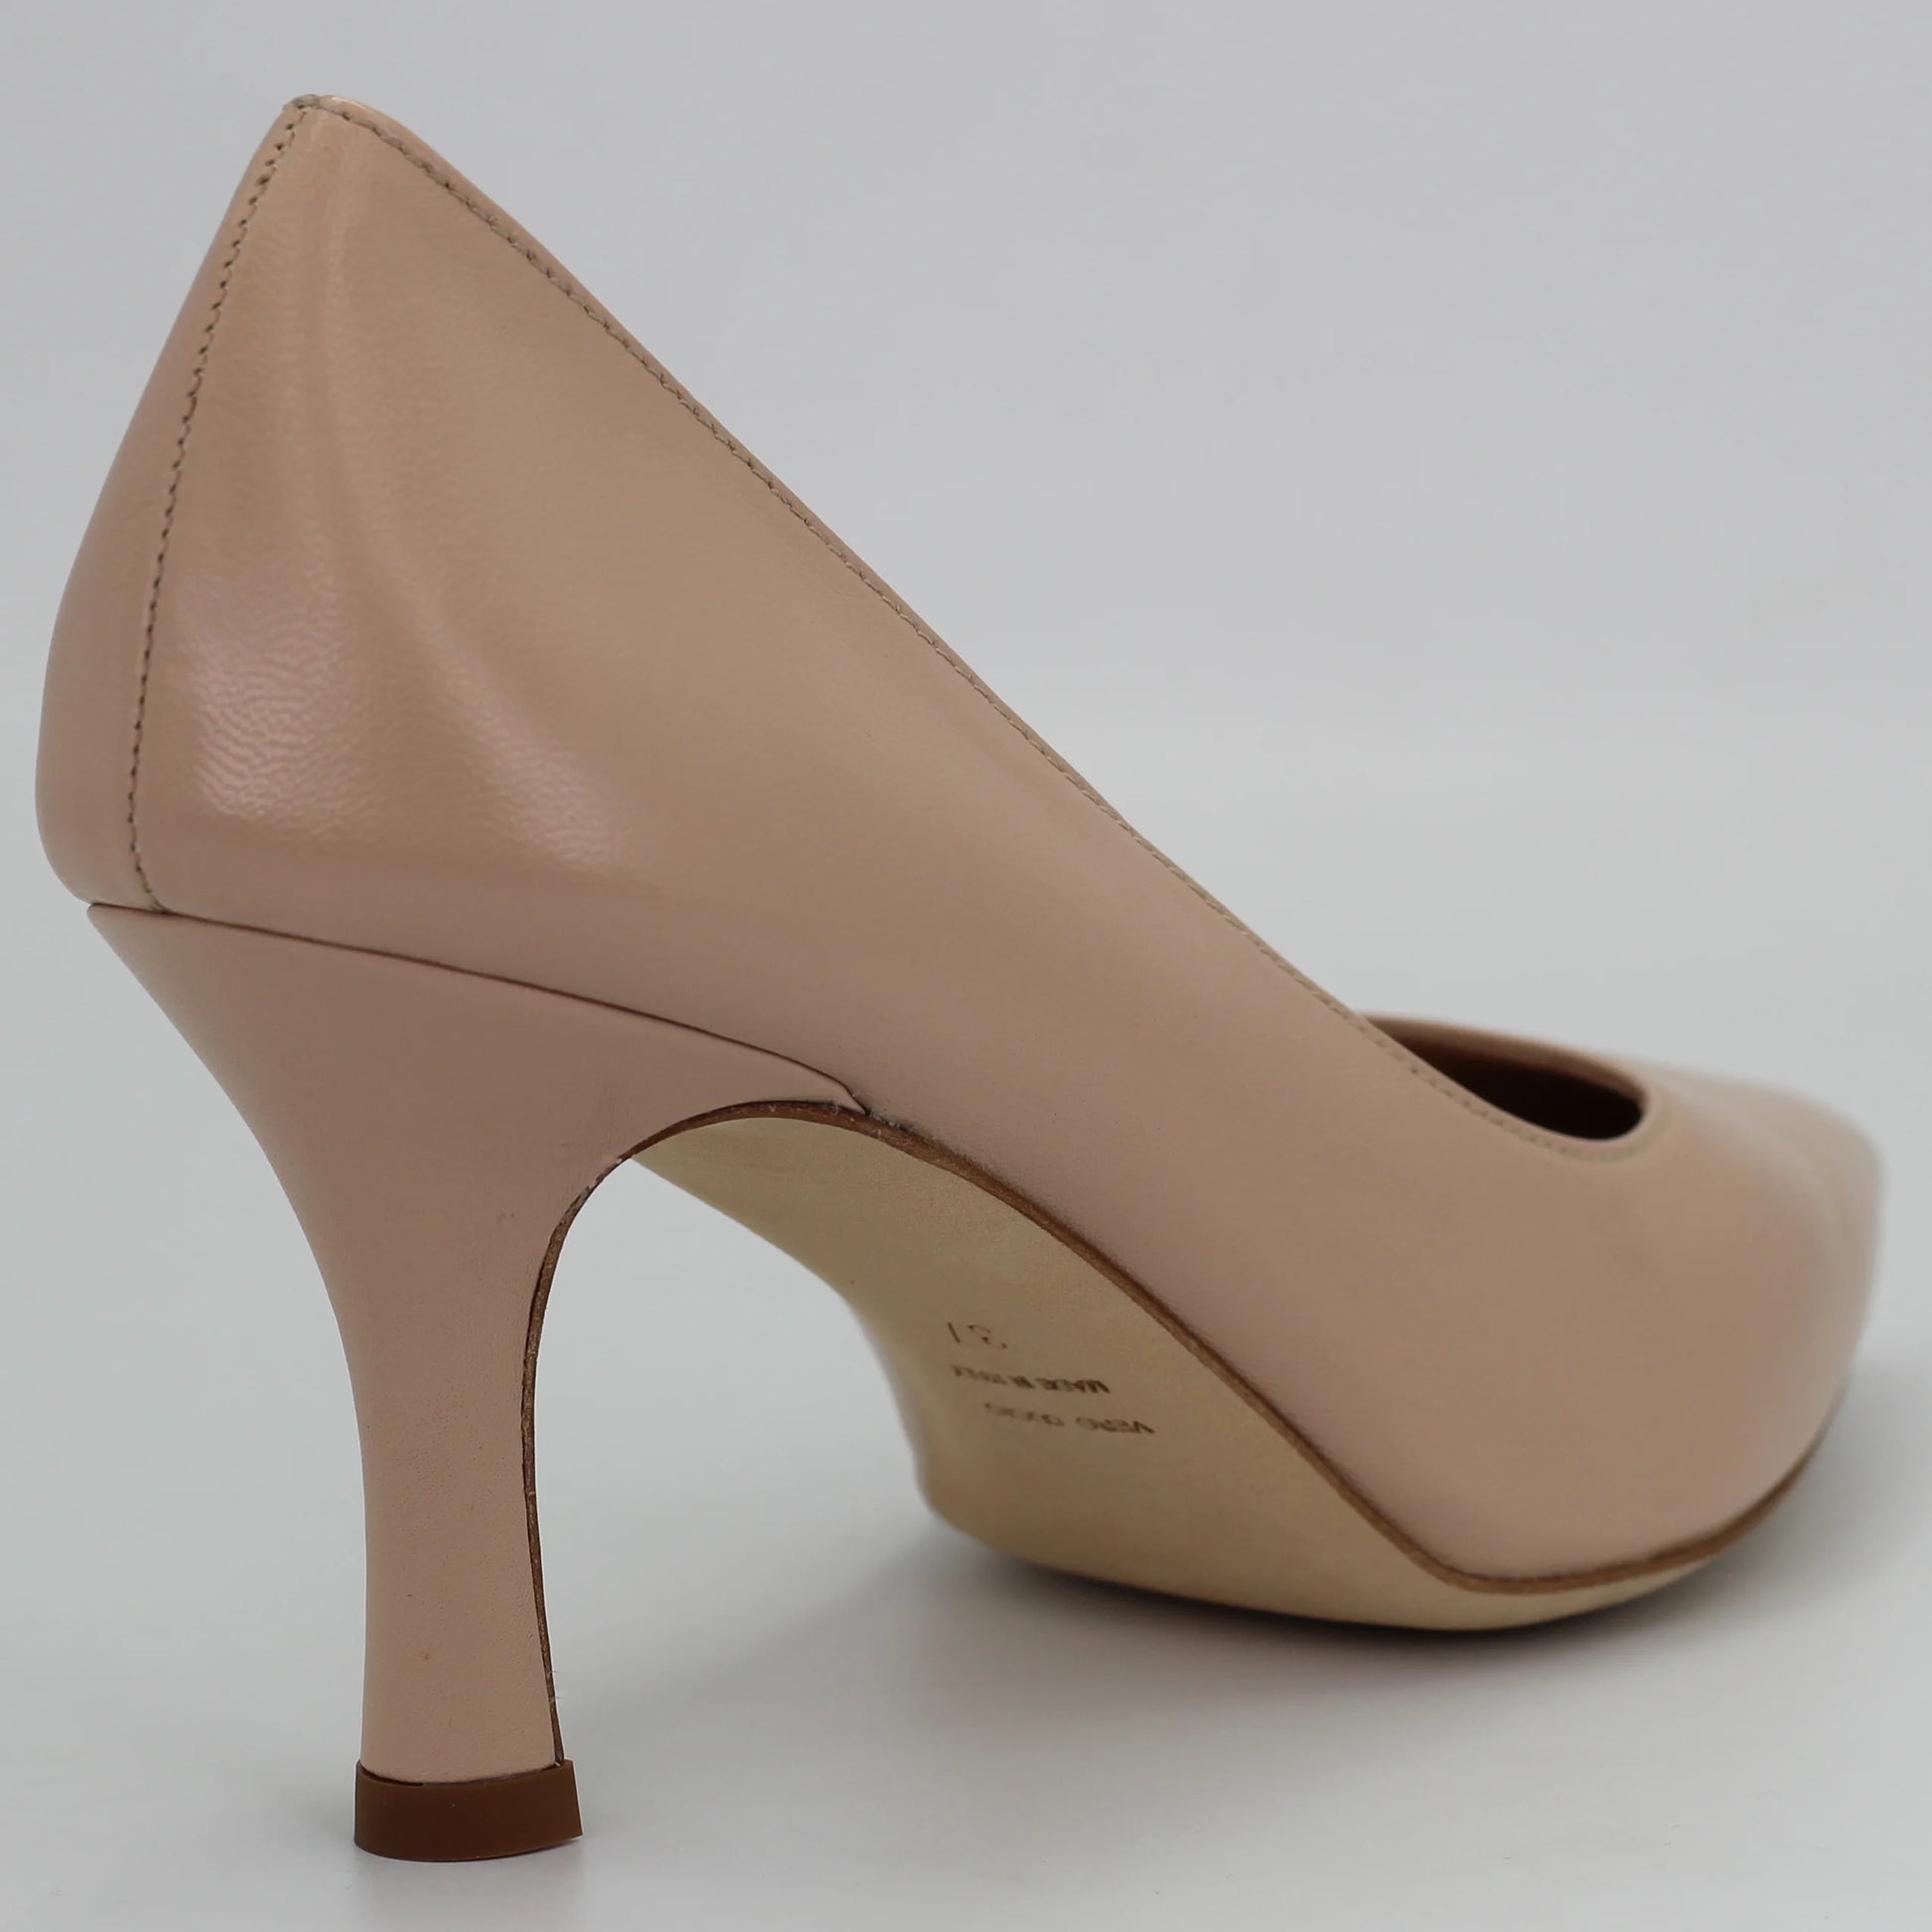 Shop Handmade Italian Leather court heel in nude (MA3771) or browse our range of hand-made Italian shoes in leather or suede in-store at Aliverti Cape Town, or shop online. We deliver in South Africa & offer multiple payment plans as well as accept multiple safe & secure payment methods.